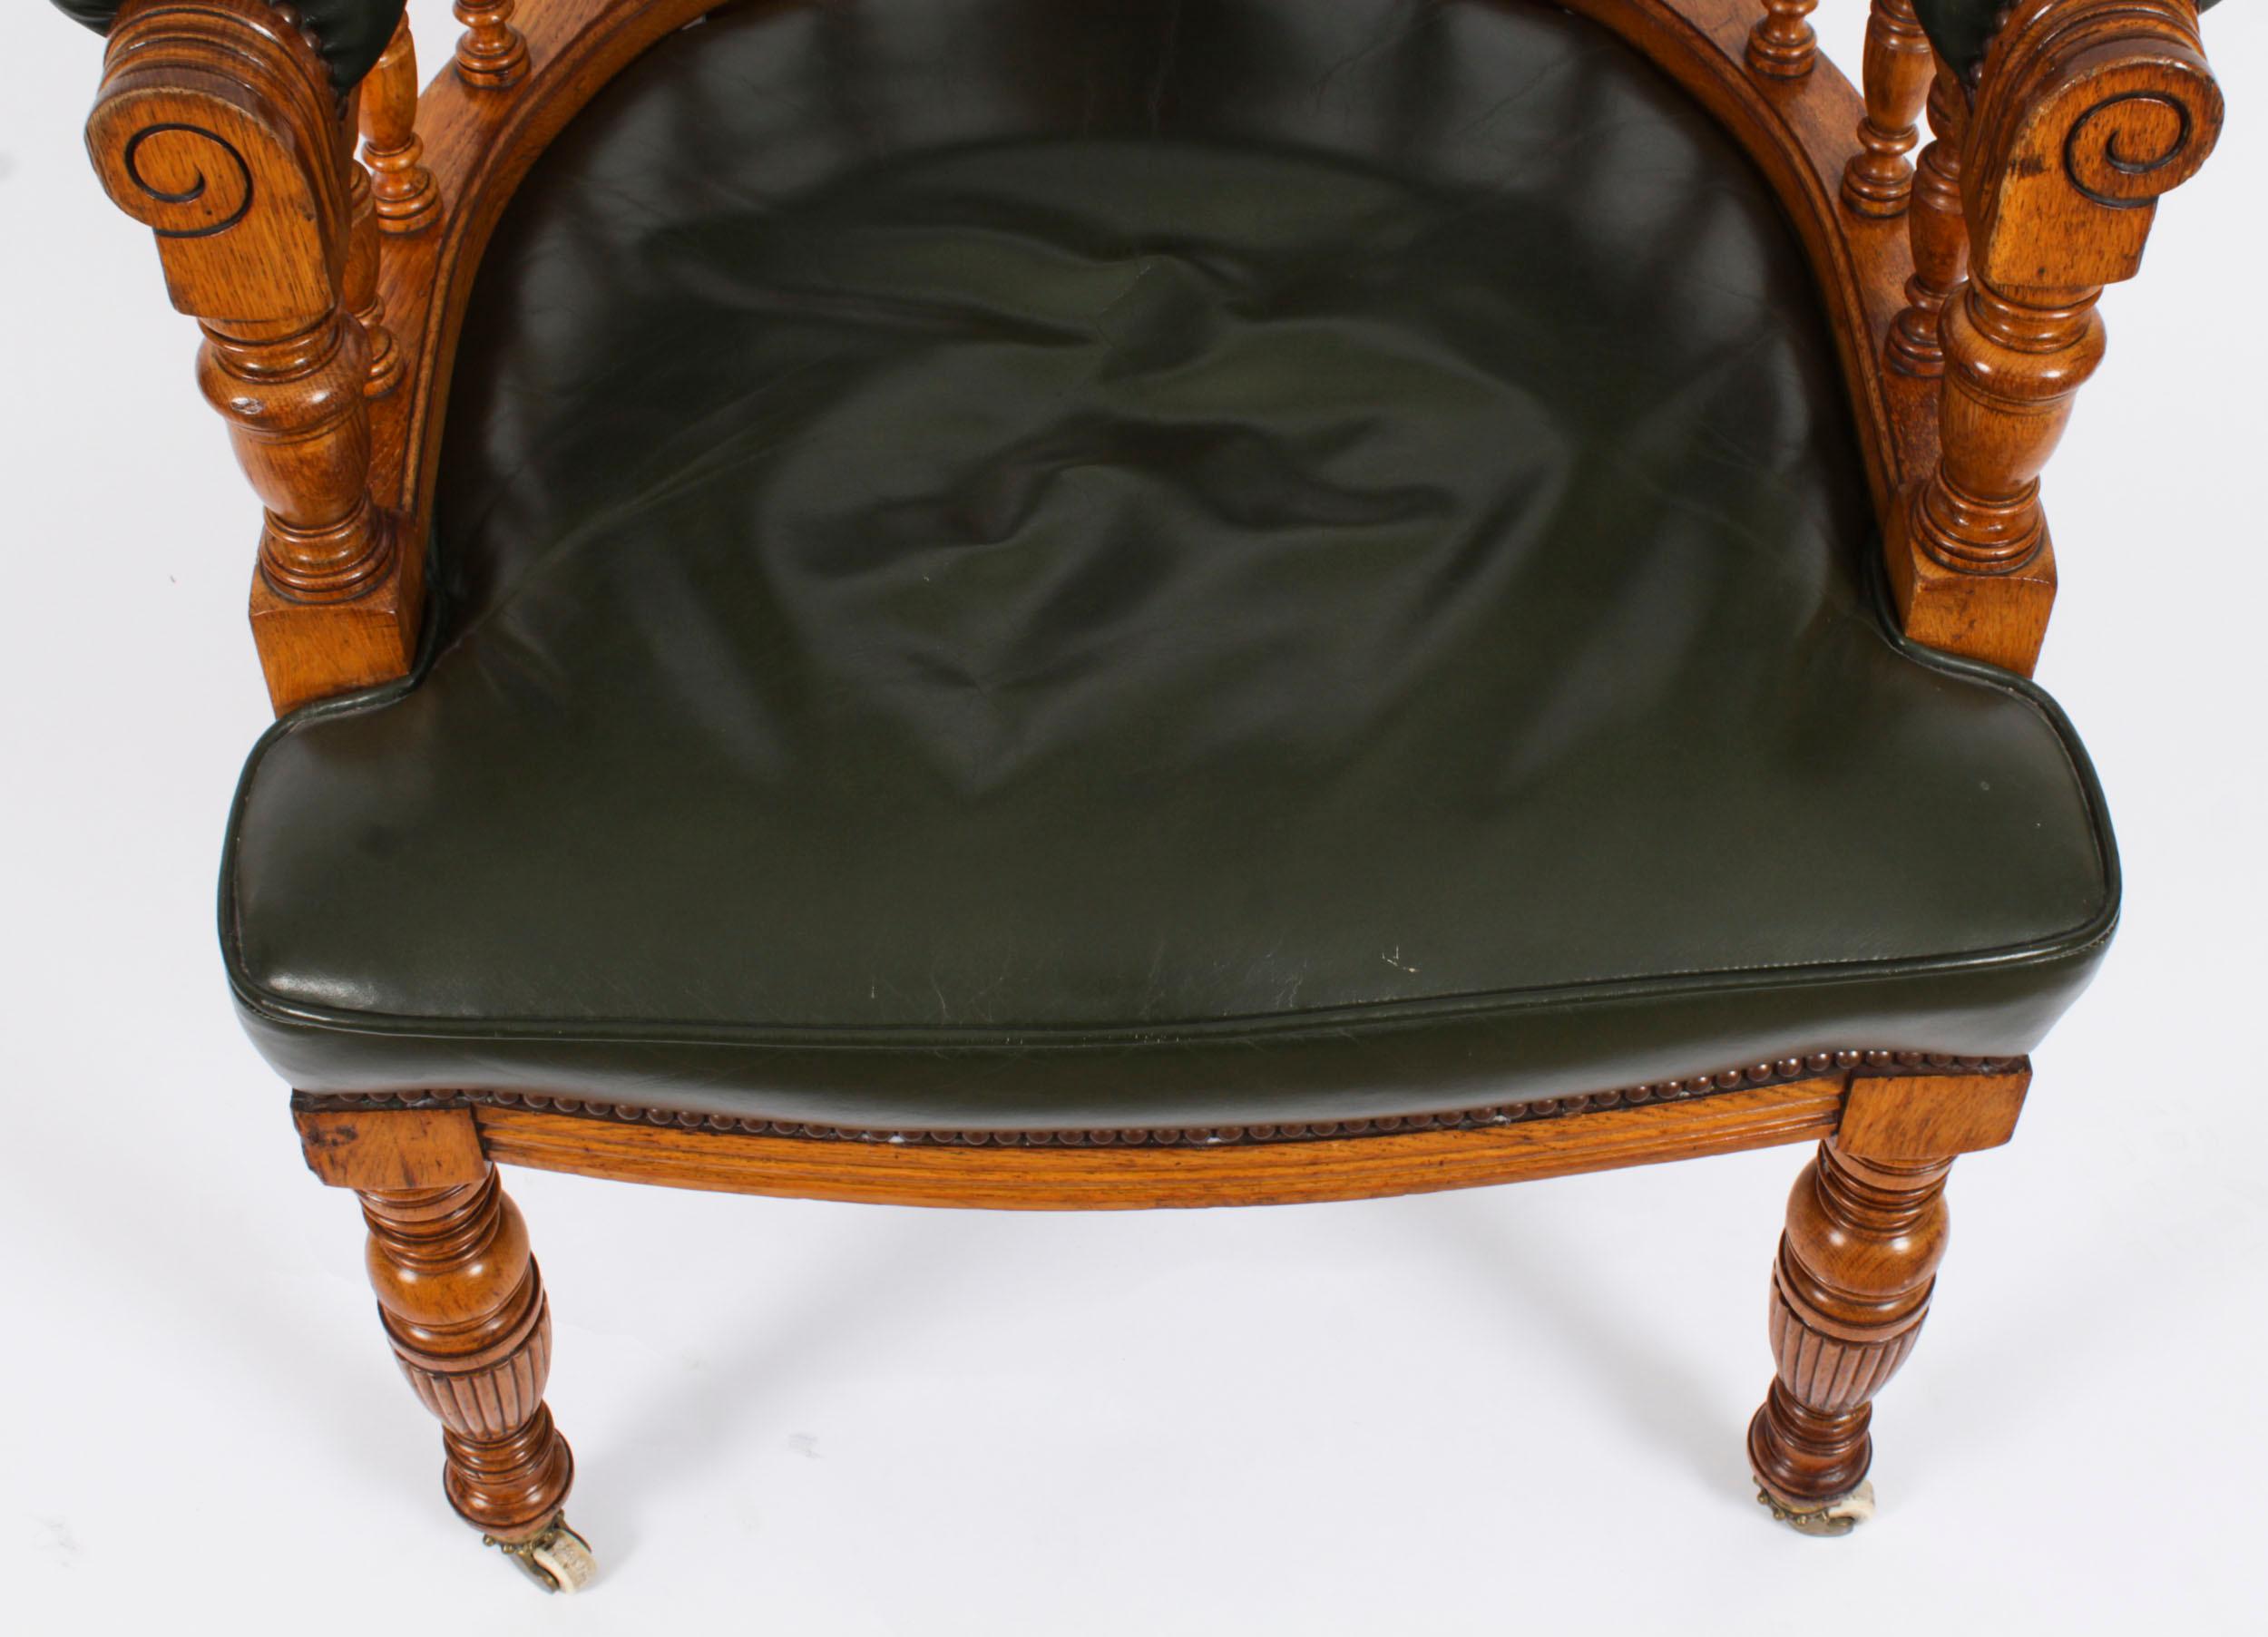 Antique Edwardian Tub Desk Armchair Green Leather Upholstered Circa 1910 For Sale 4